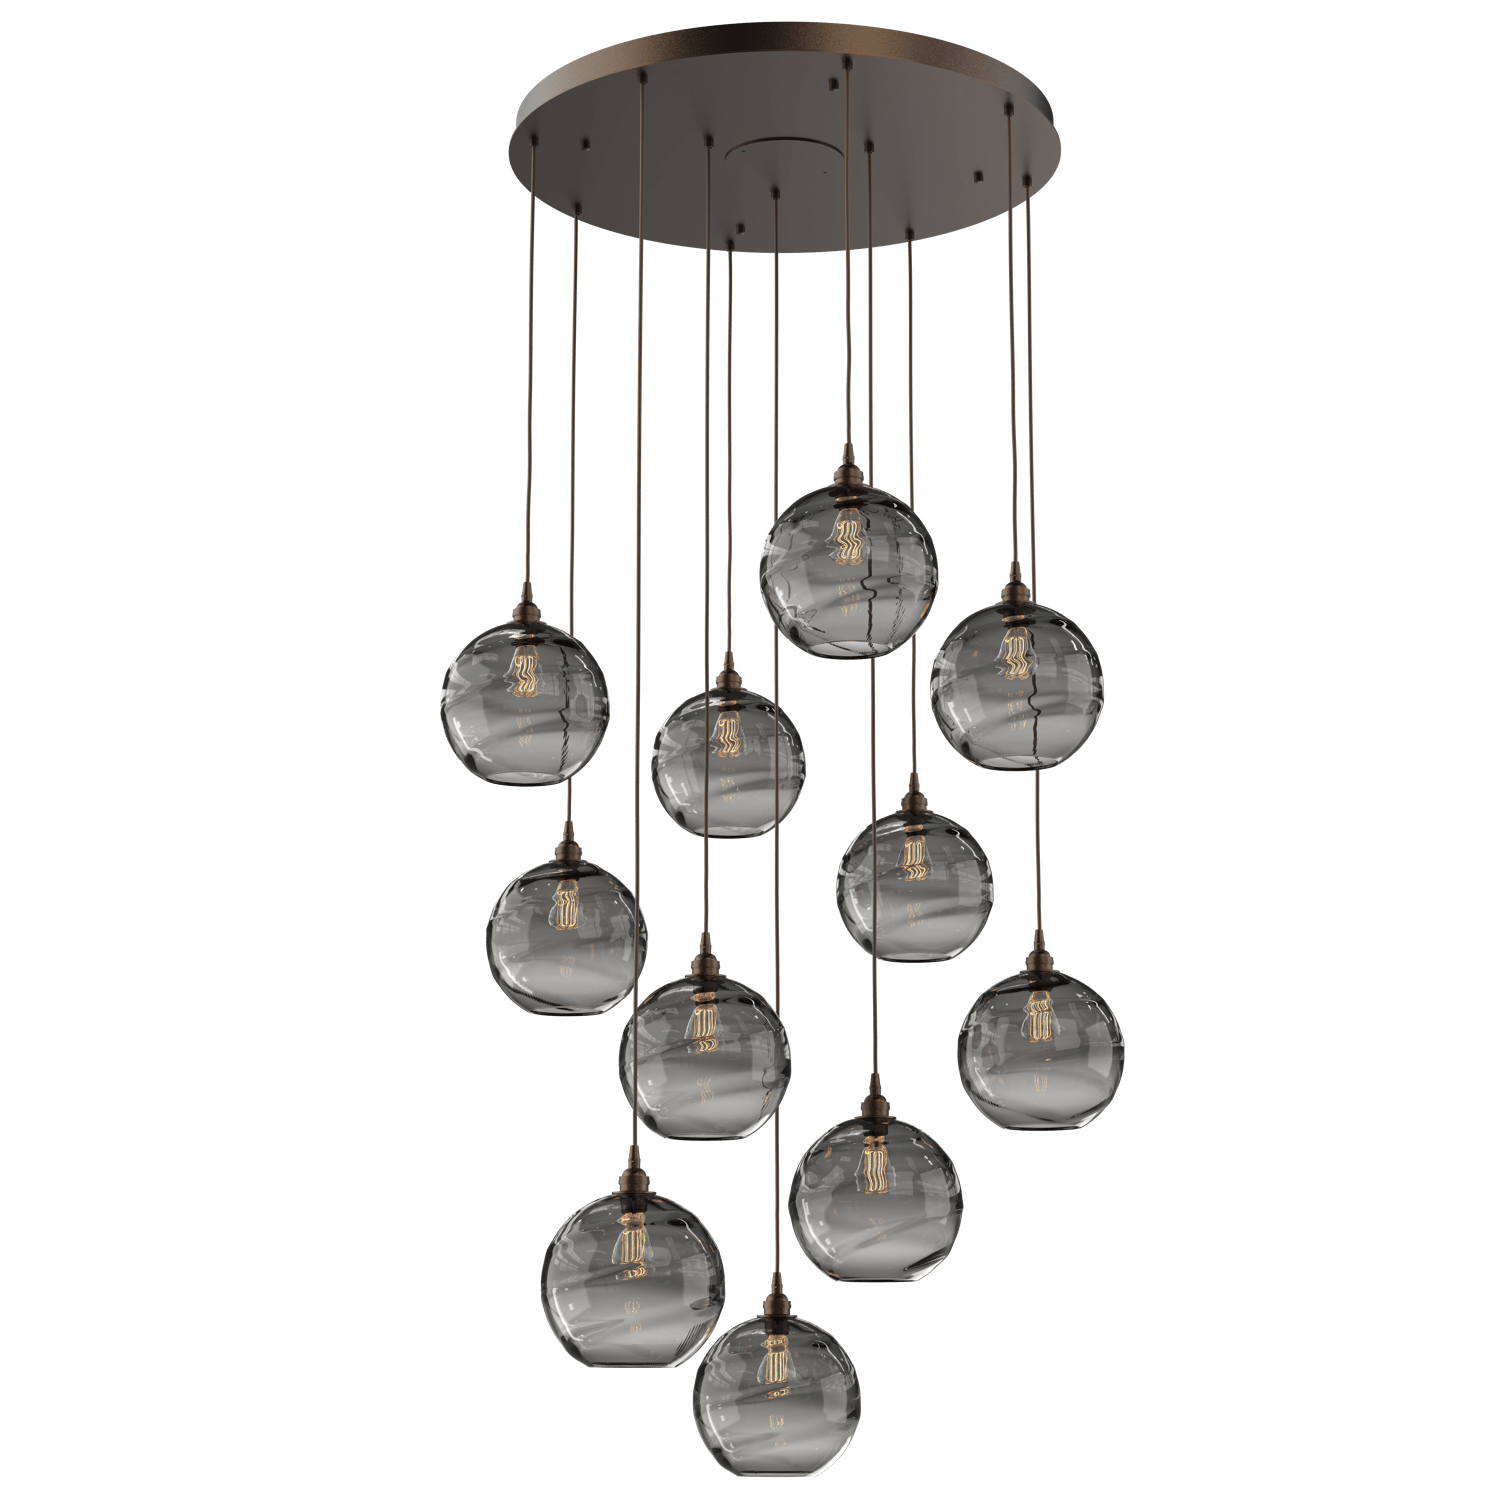 CHB0047-11-FB-OS-Hammerton-Studio-Optic-Blown-Glass-Terra-11-light-round-pendant-chandelier-with-flat-bronze-finish-and-optic-smoke-blown-glass-shades-and-incandescent-lamping